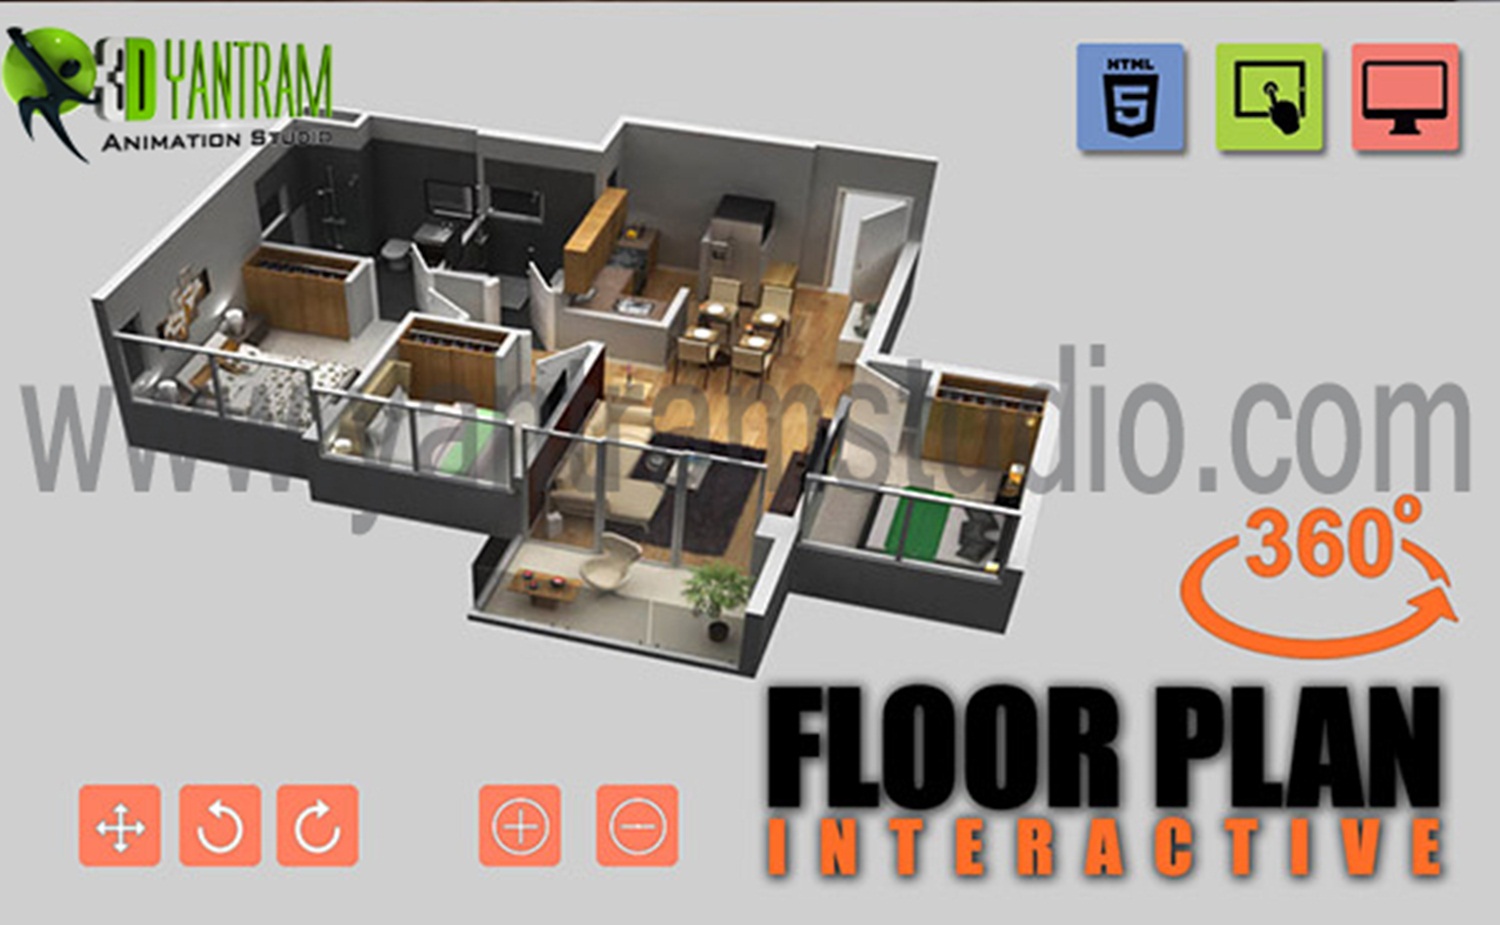 Virtual Reality Floorplan By Yantram Development- Brisbourne, Australia - VR Realstate marketing-oriented website that is well designed with calls to action can literally catapult your real estate business to the next level. Ninety-two percent of home buyers use the internet. by Yantramarchitecturaldesignstudio